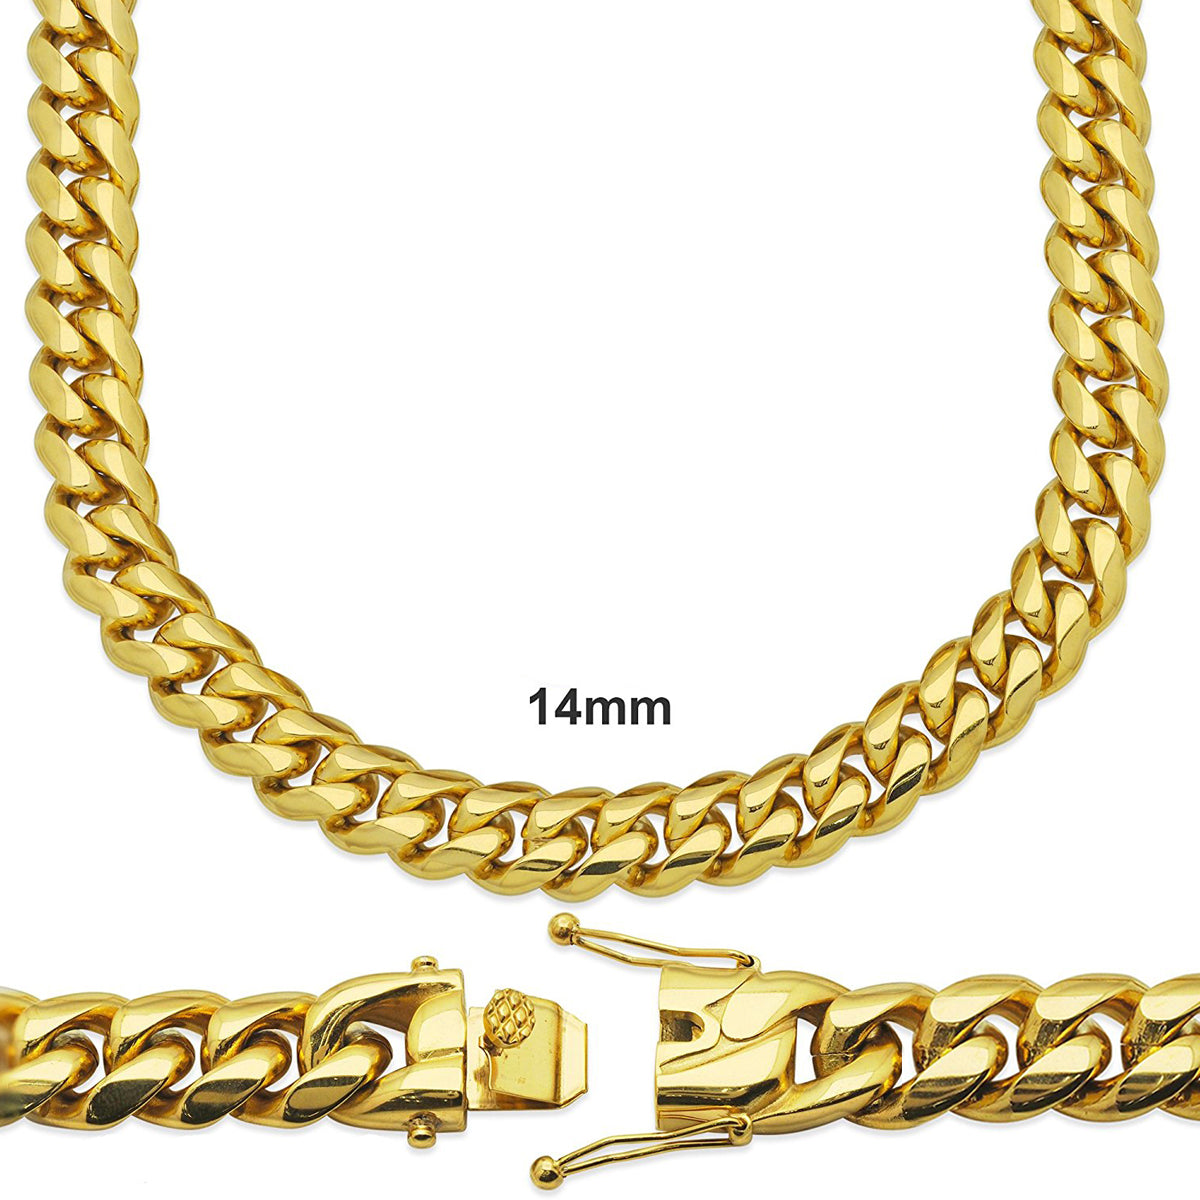 Men's Stainless Steel Thick 14mm 18" Miami Cuban Chain